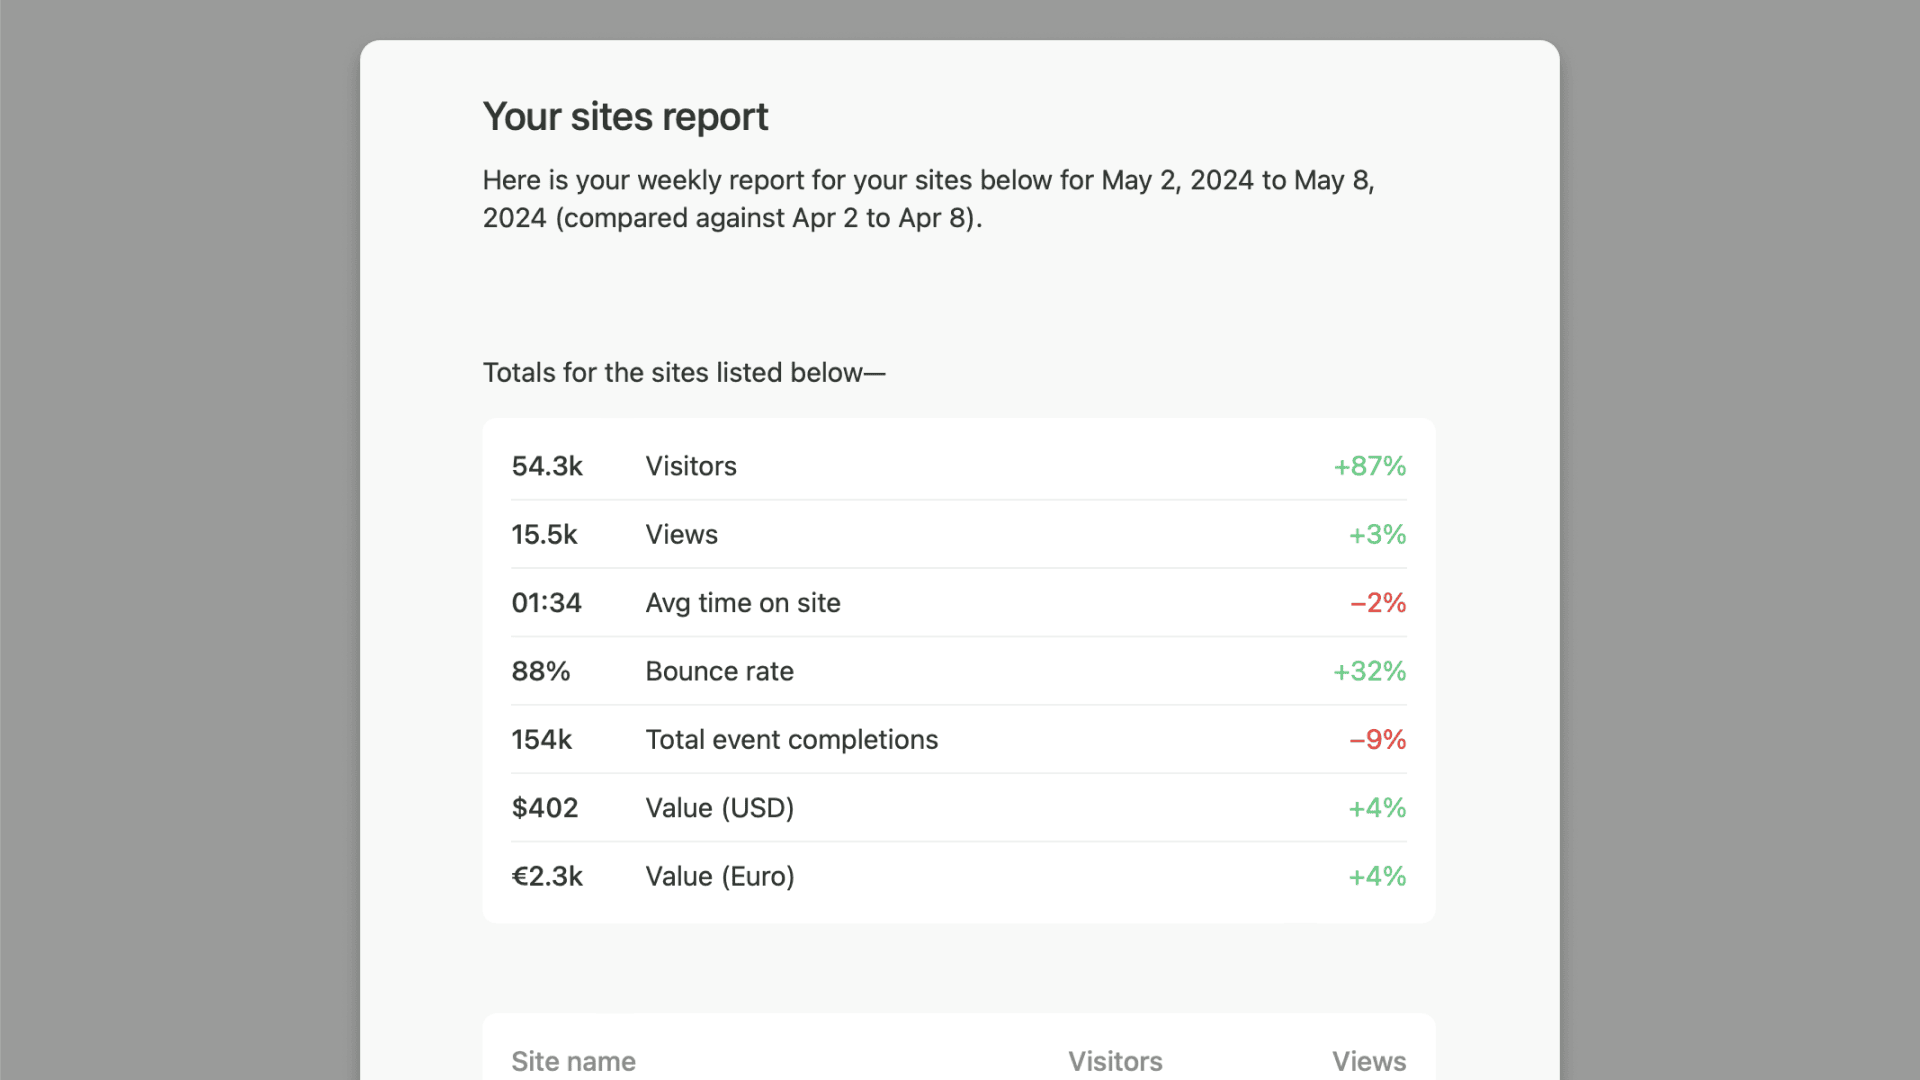 Example of an email report for multiple sites.